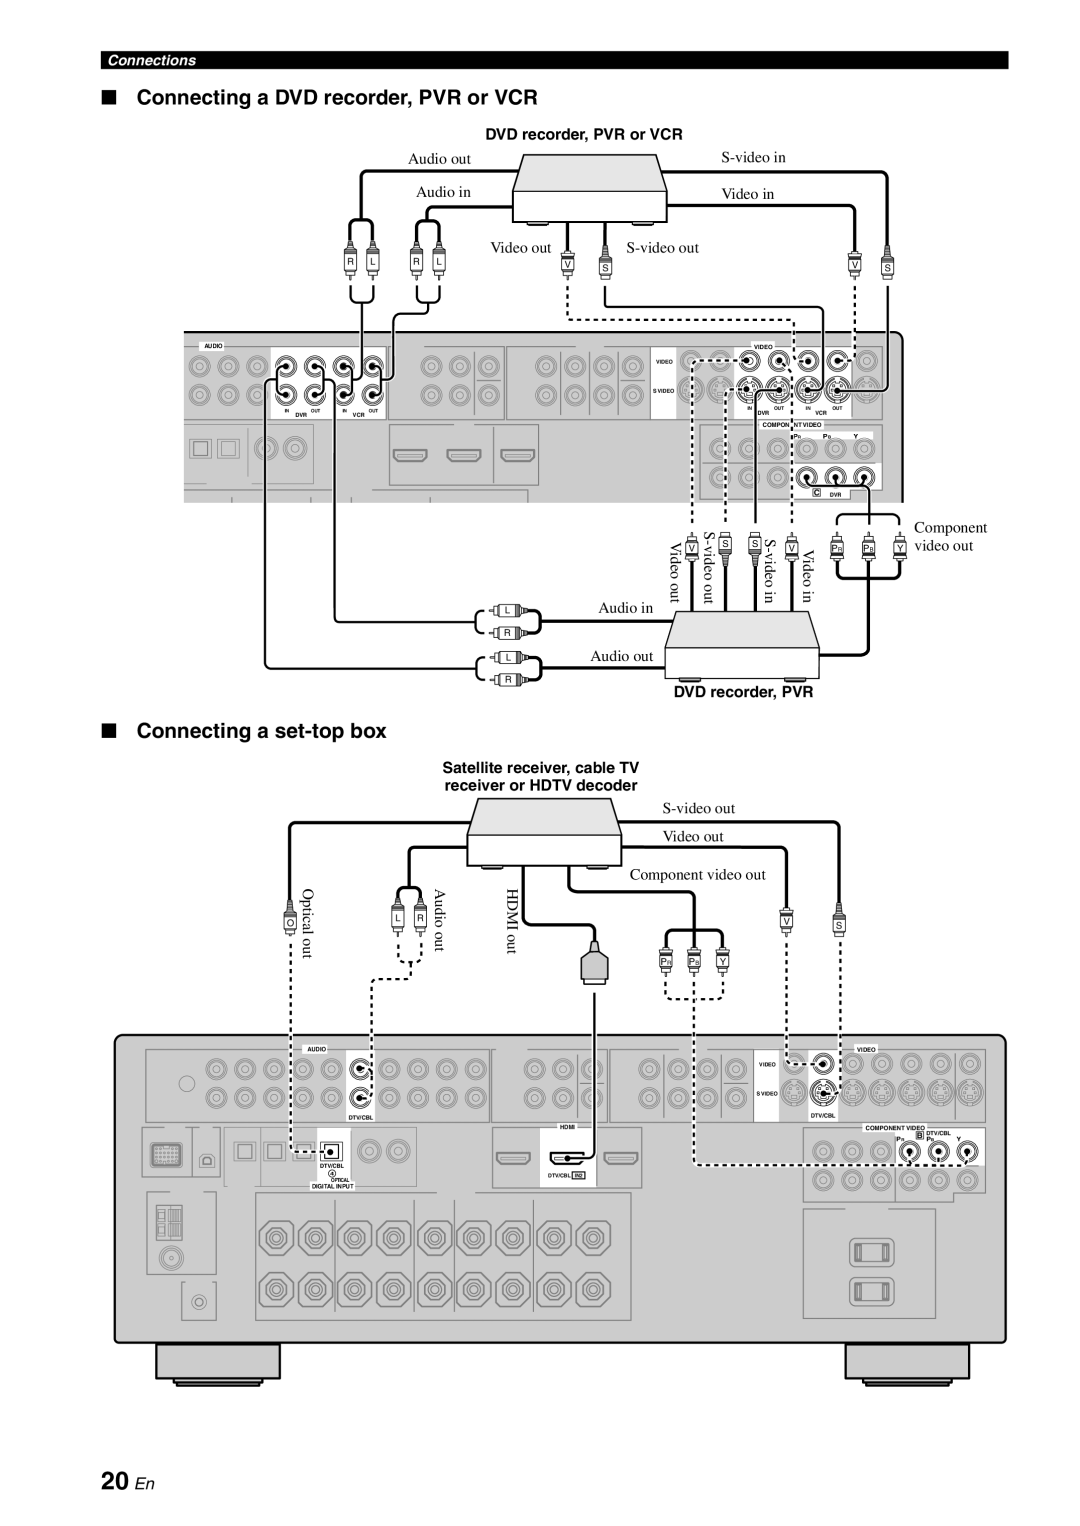 Yamaha HTR-6060 owner manual 20 En, Connecting a DVD recorder, PVR or VCR, Connecting a set-topbox 